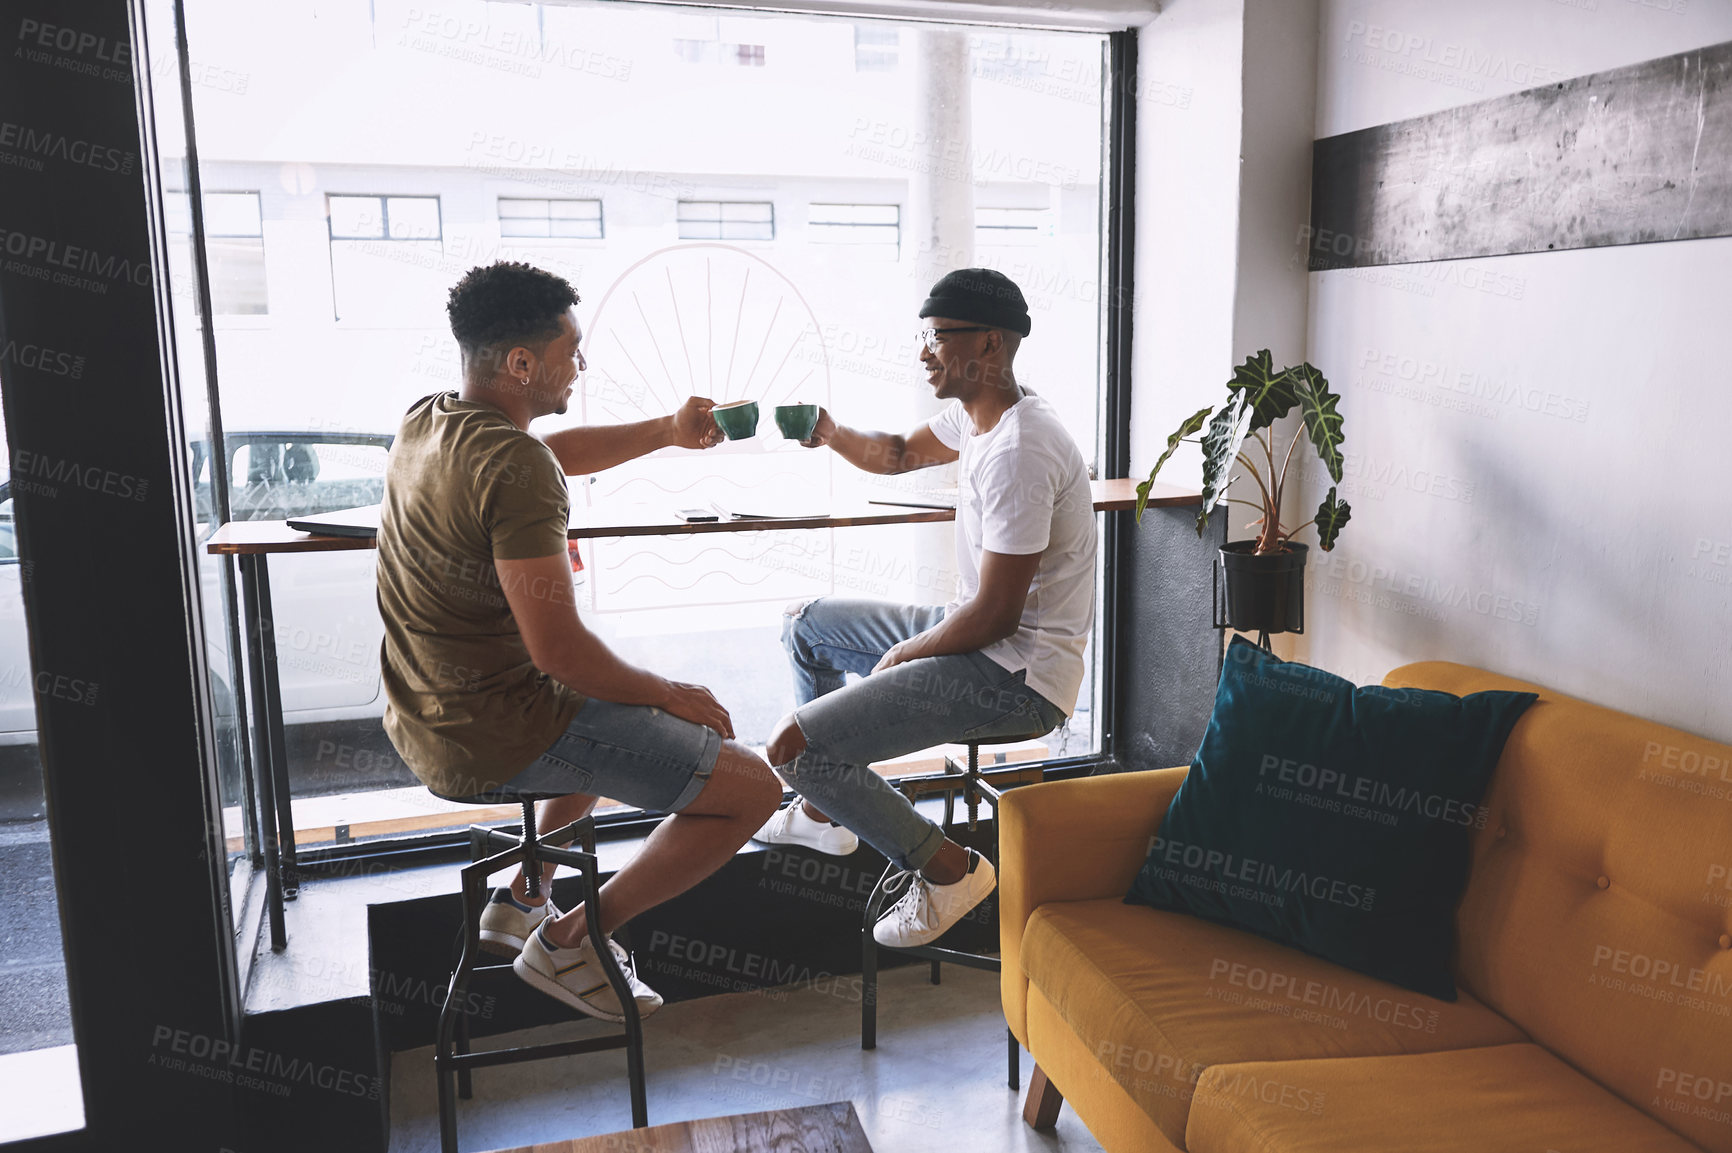 Buy stock photo Shot of two young men having coffee together in a cafe